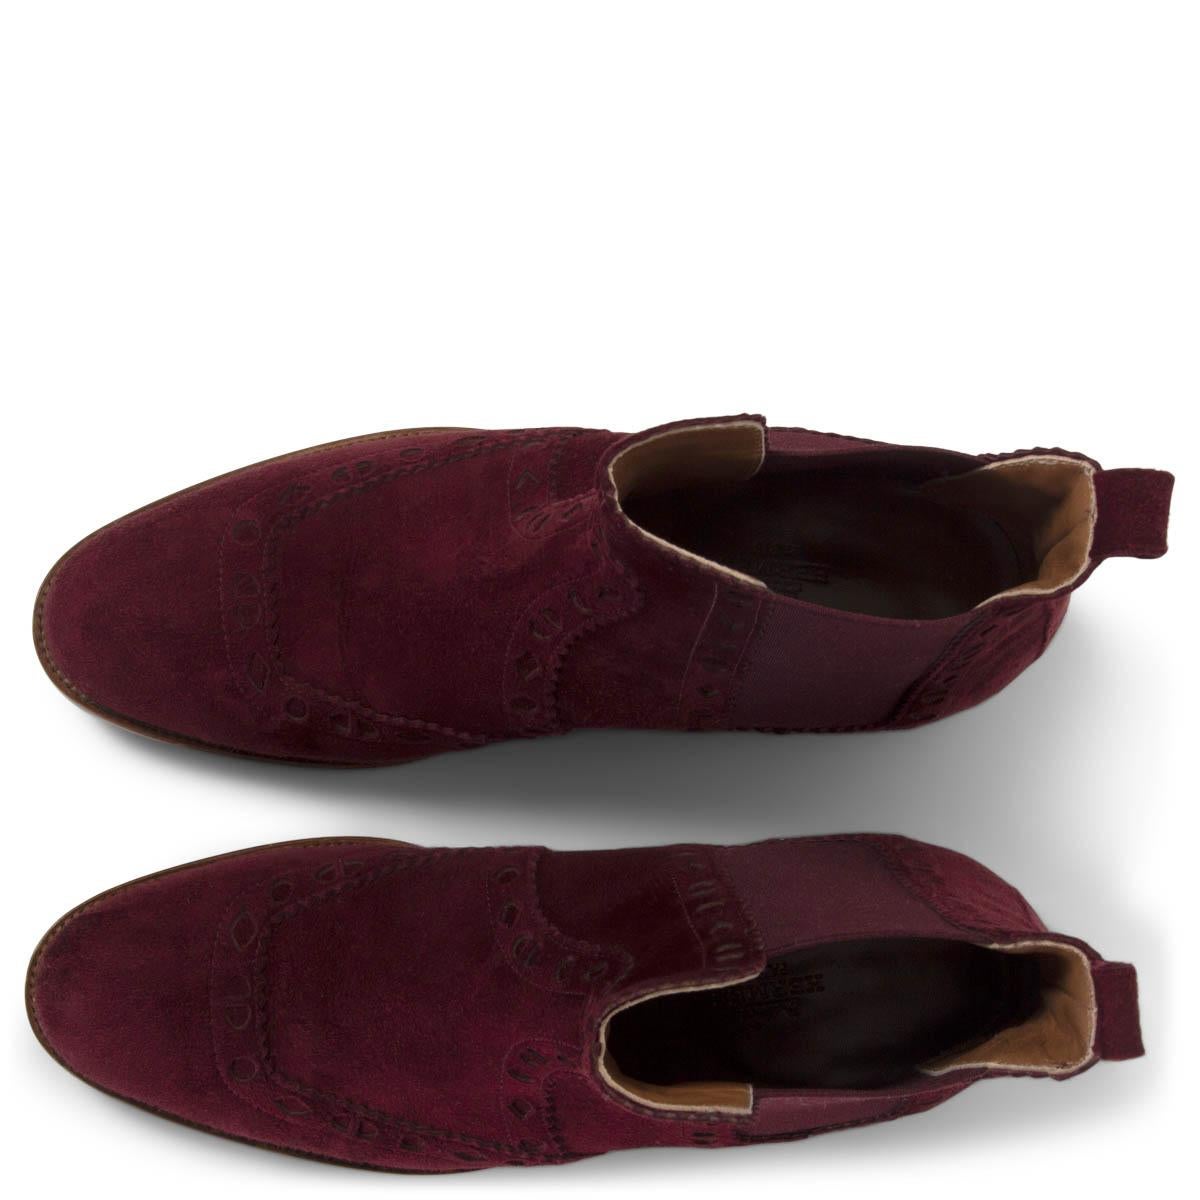 burgundy suede chelsea boots womens